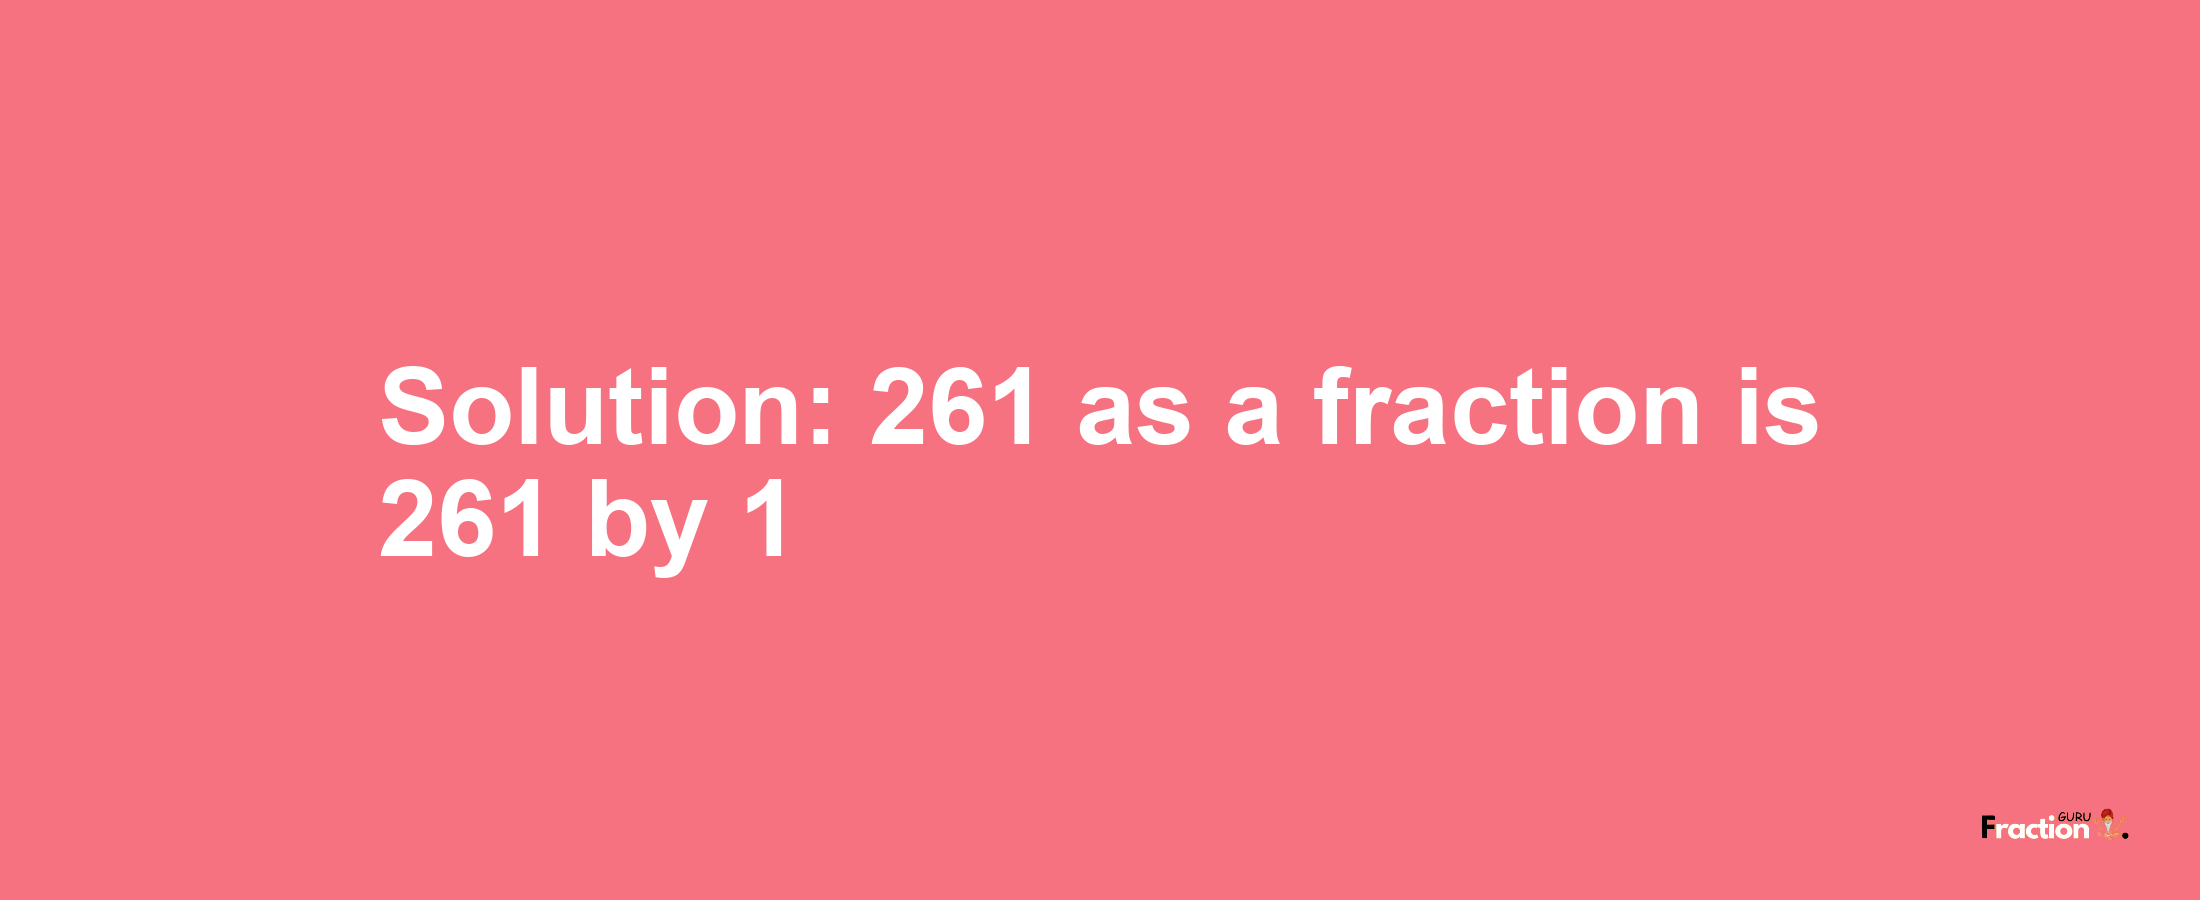 Solution:261 as a fraction is 261/1